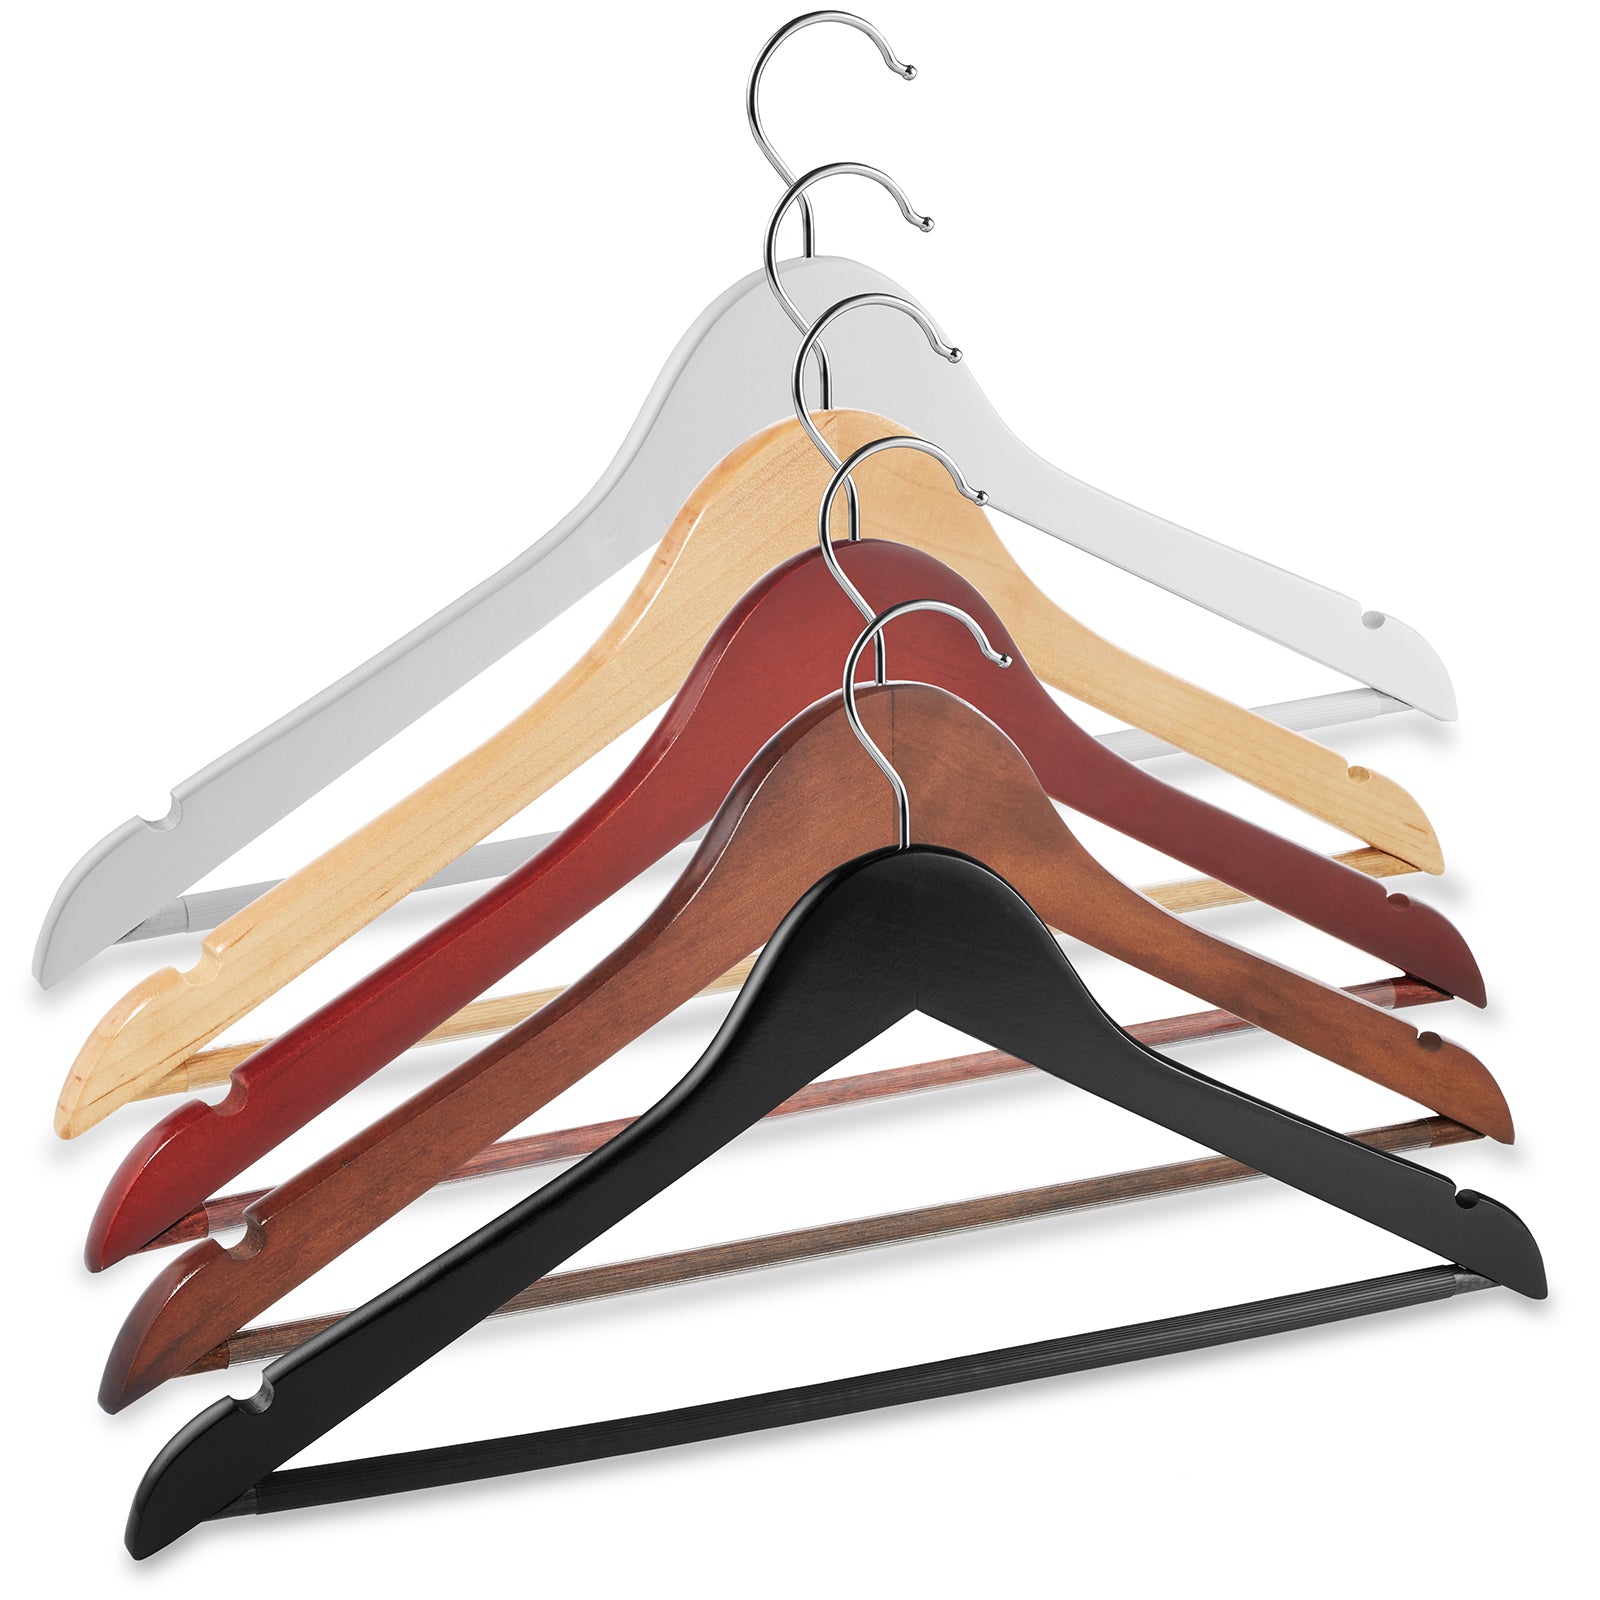 Casafield - Red Cedar Wooden Suit Hangers with Smooth Finish, Notches, and  Swivel Hook - Natural Wood Hangers for Clothes, Coats, Pants, Shirts,  Skirts